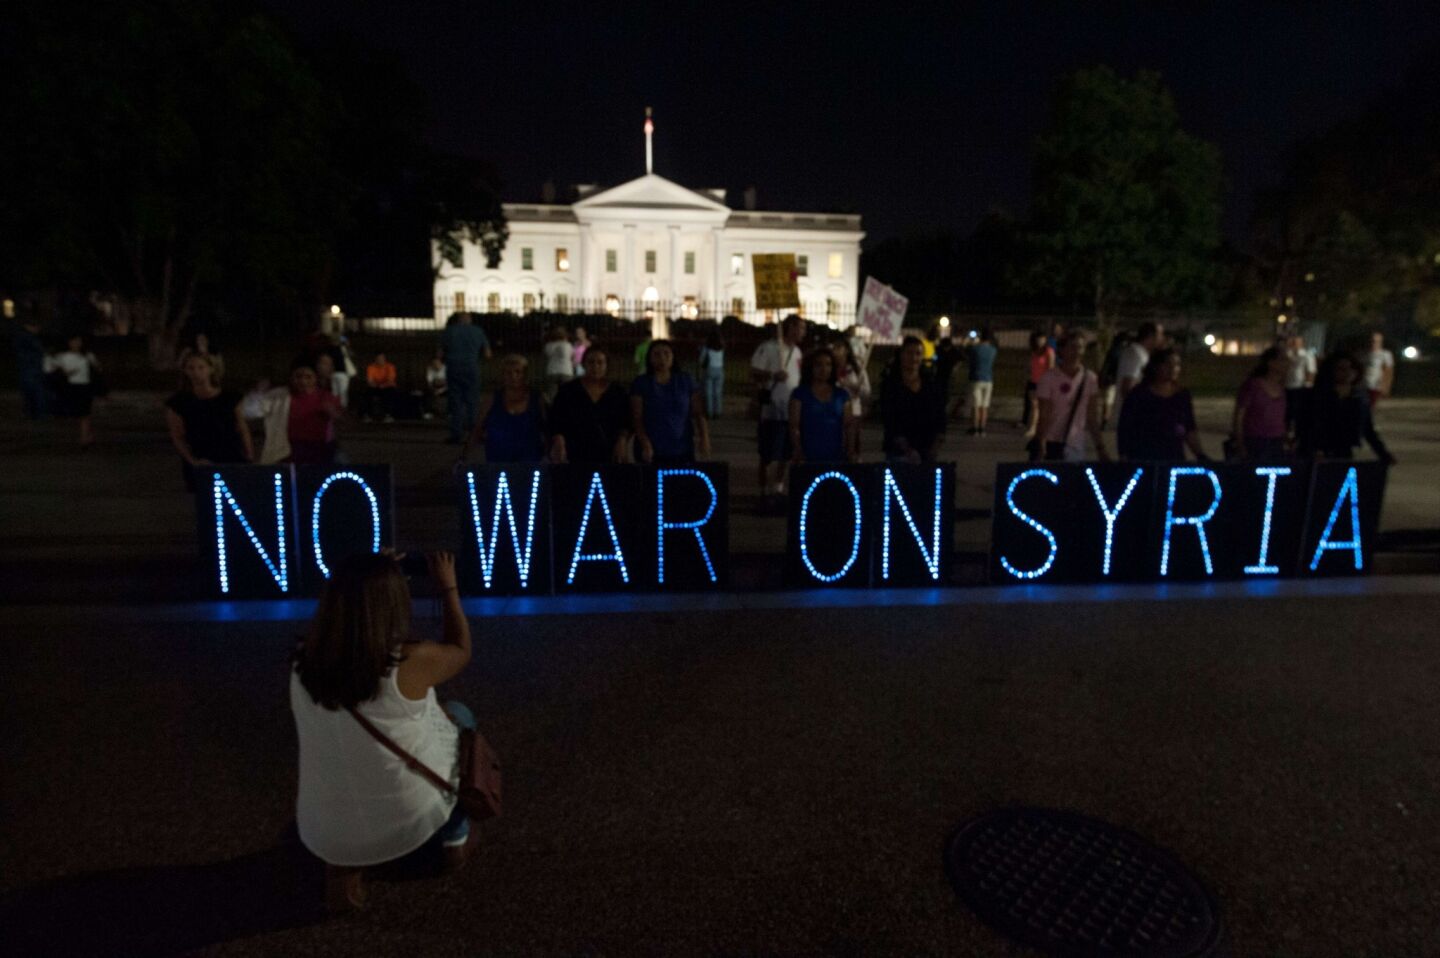 Anti-war demonstrators protest against U.S. intervention in Syria in front of the White House.